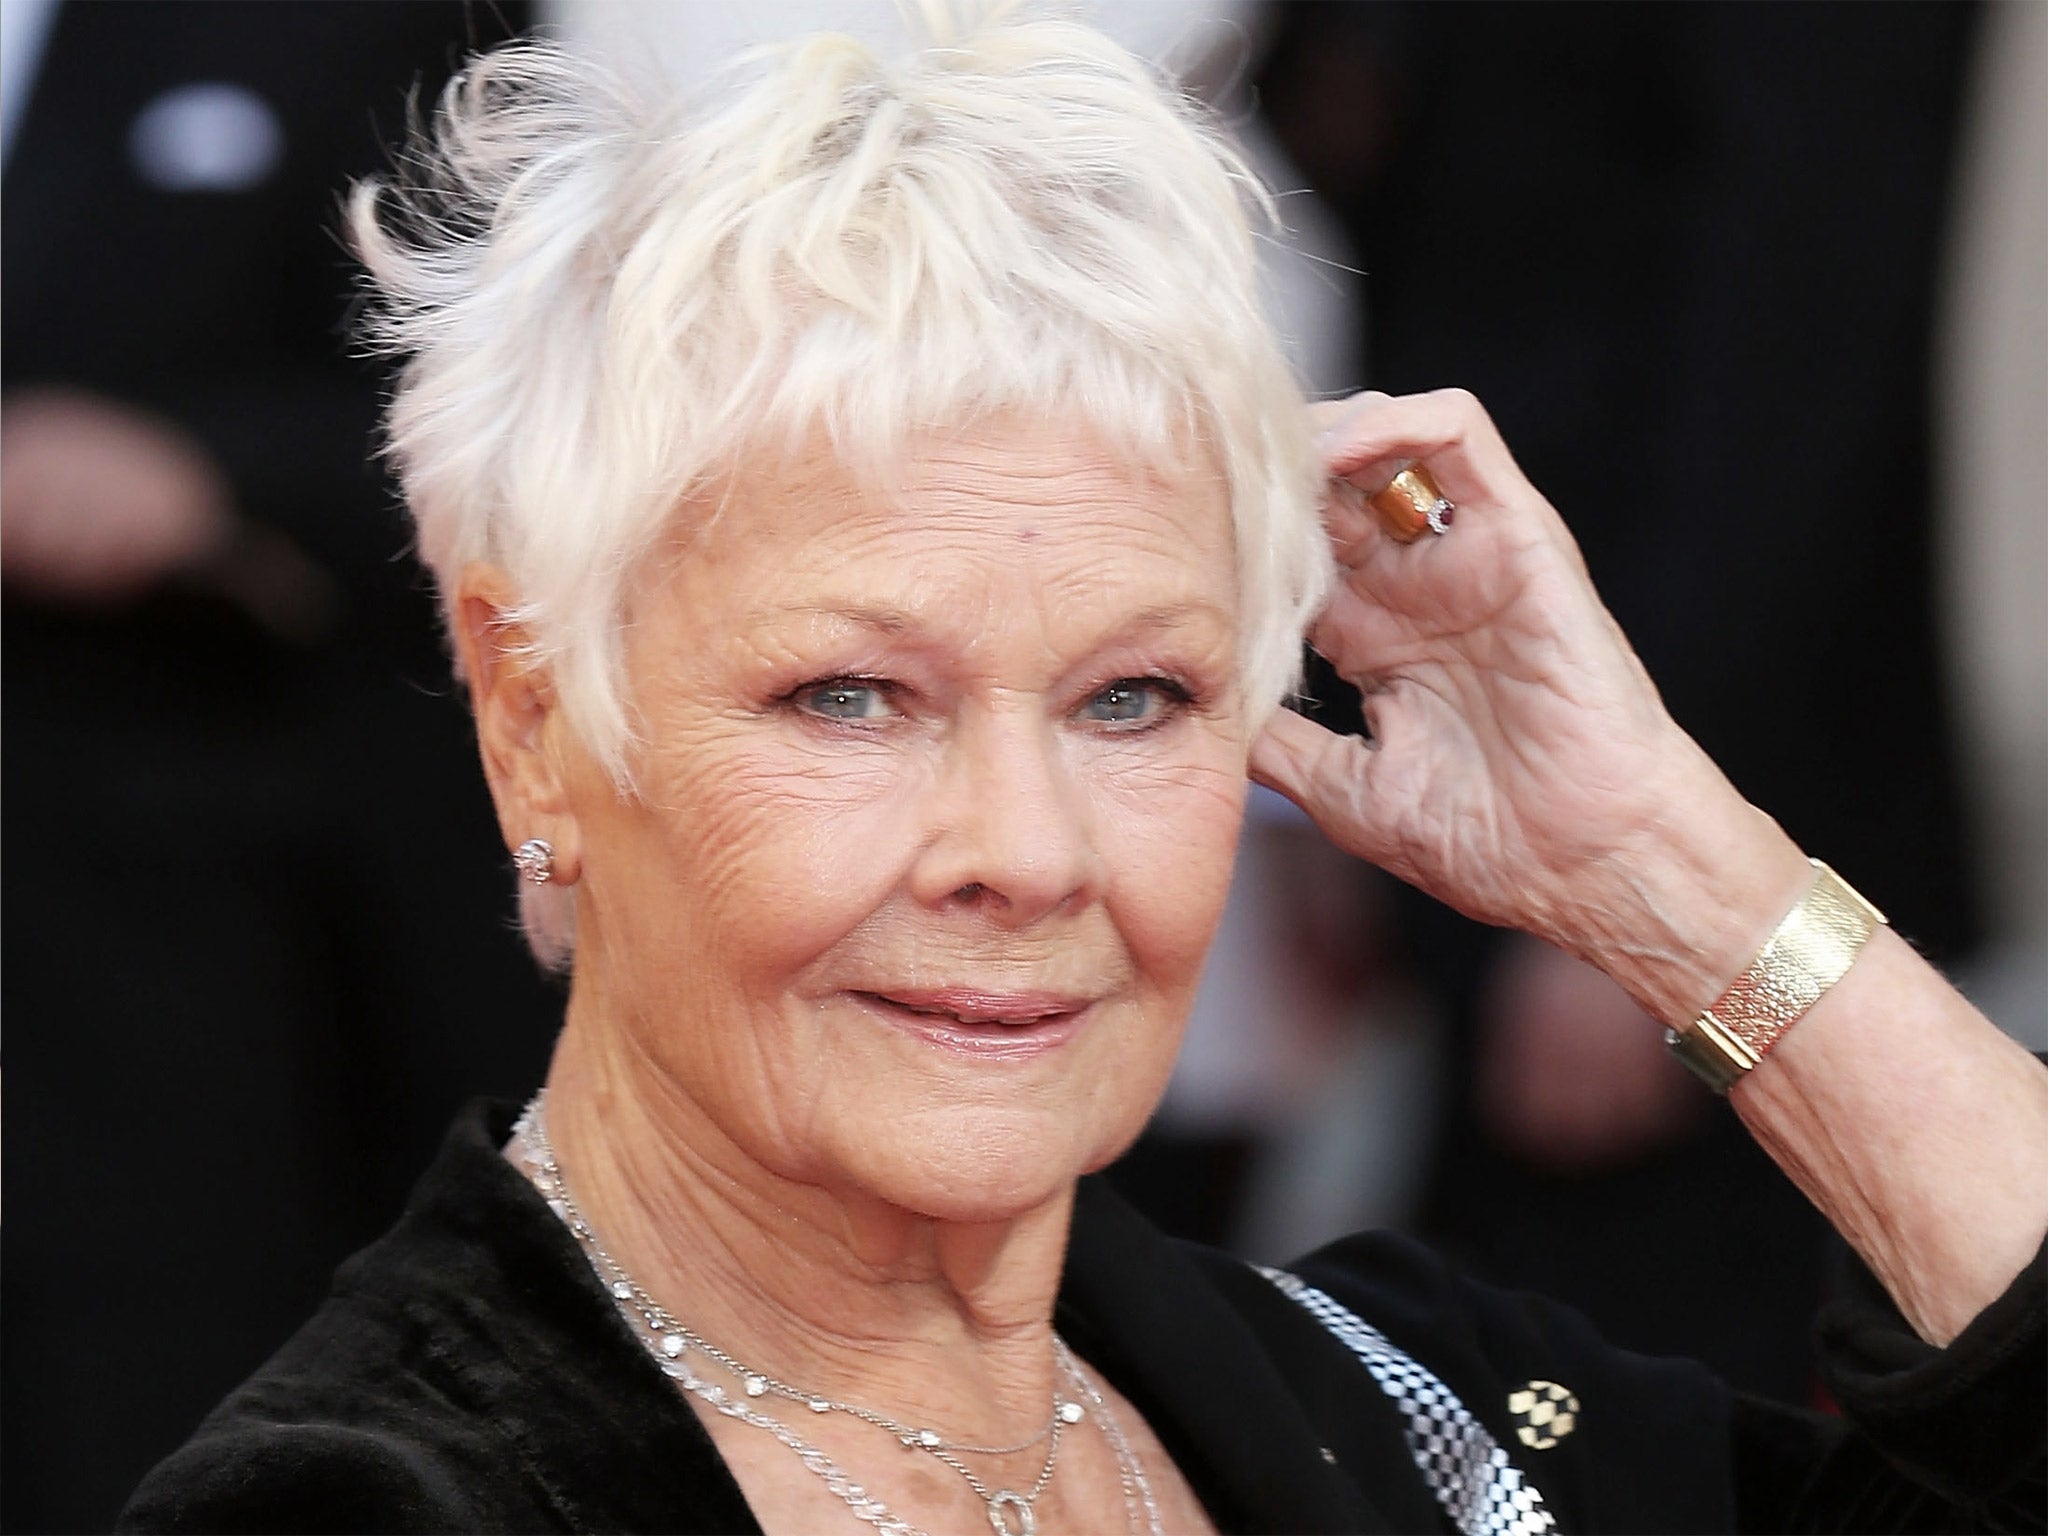 Dench suffers from a serious eye condition which has left her struggling to watch films, but shows no sign of lessening her workload